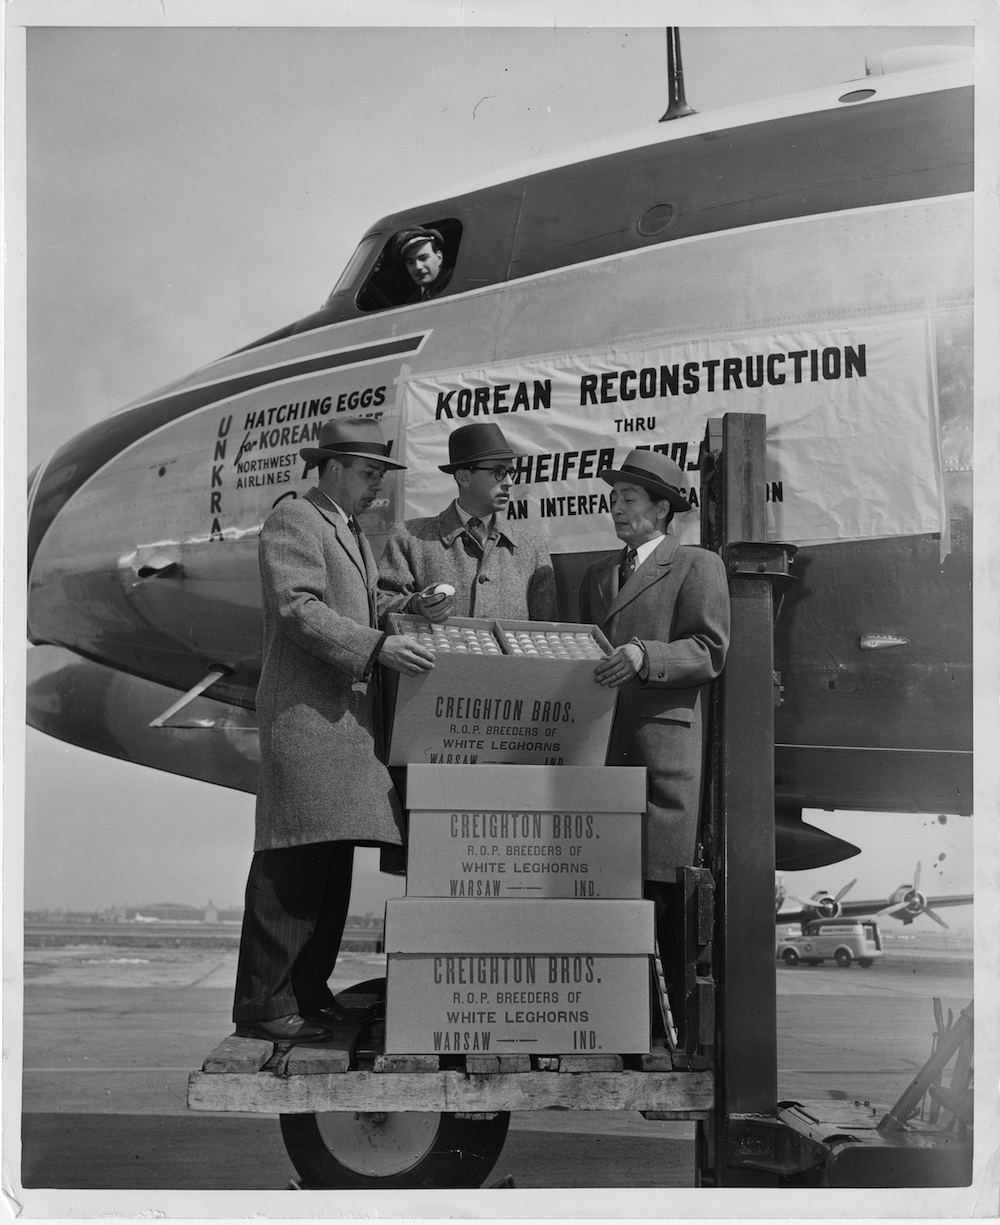 A black and white photo of three men standing by a plane, holding crates of eggs to donate.